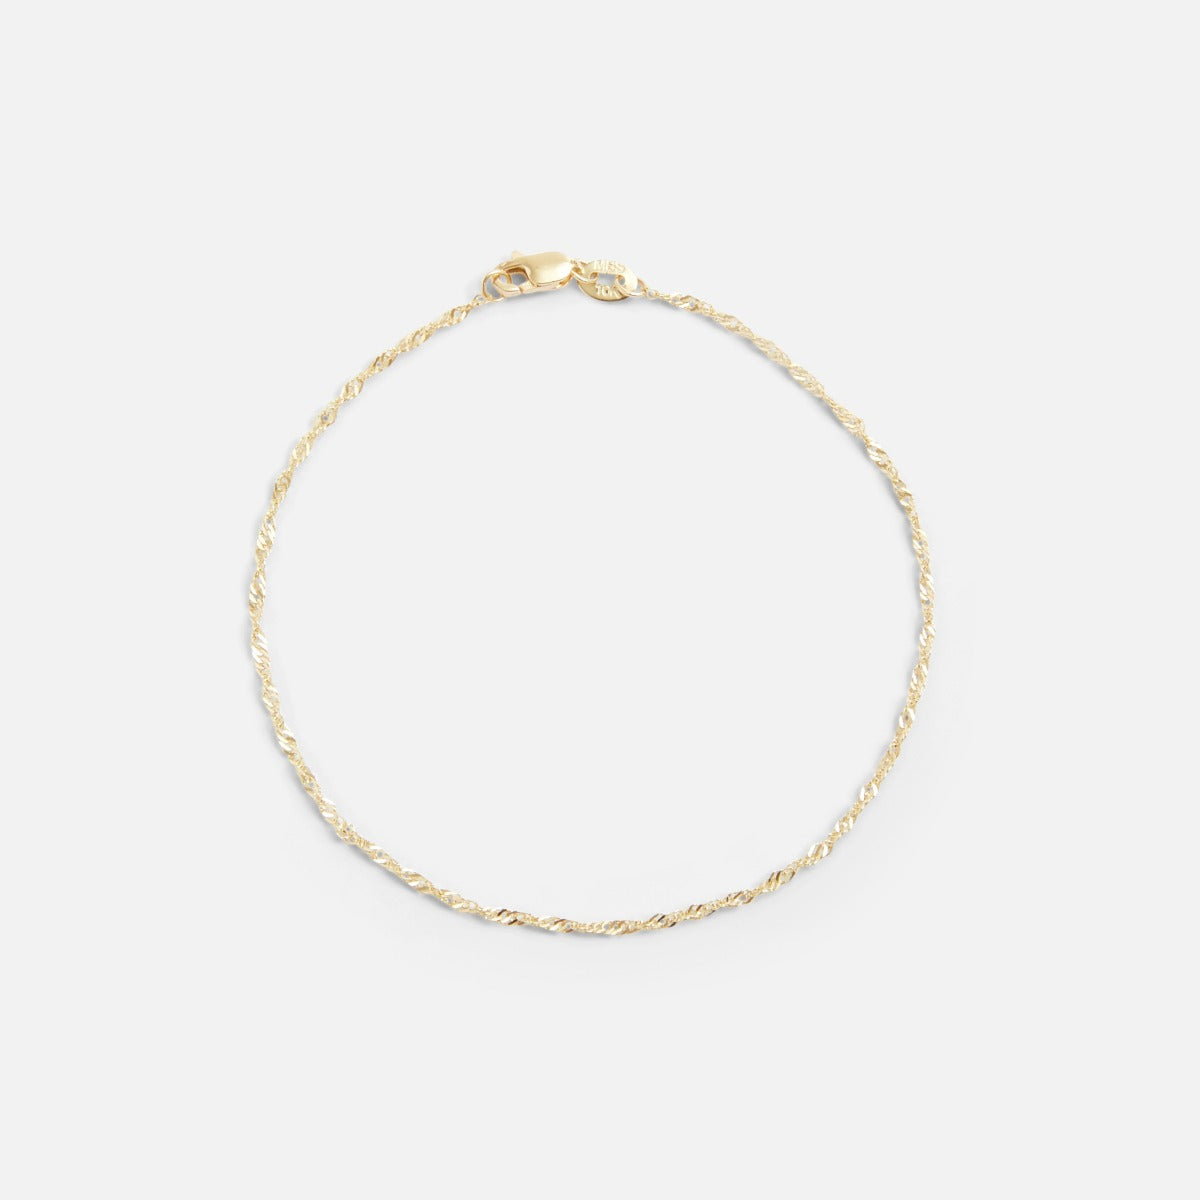 9.5'' Singapore ankle chain 10k yellow gold